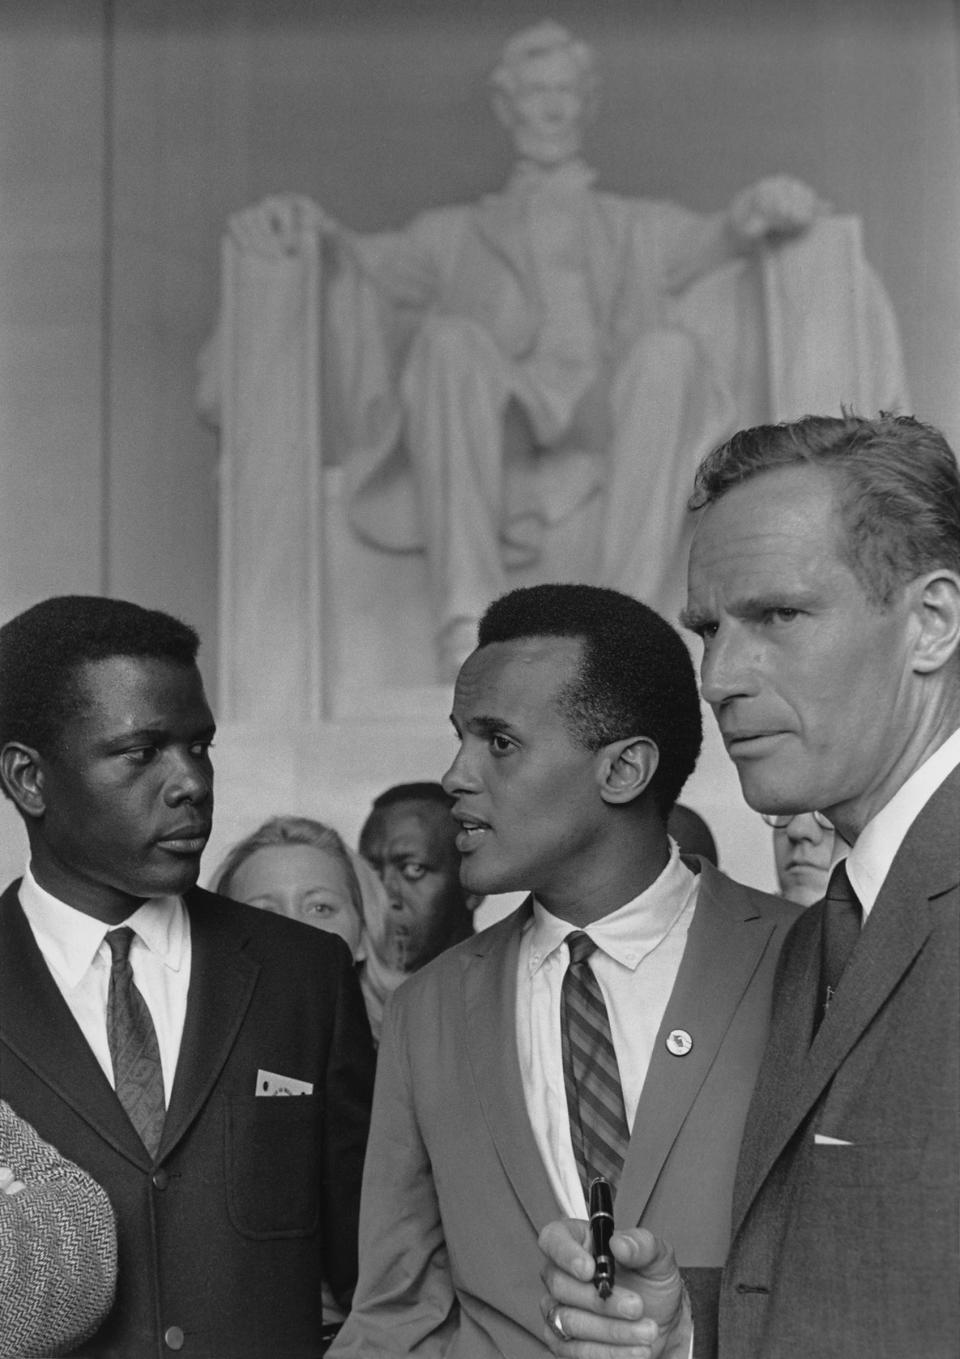 Actors Sidney Poitier, Charlton Heston and singer Harry Belafonte at the 1963 Civil Rights March on Washington. Aug. 28, 1963.<span class="copyright">Courtesy Everett Collection</span>